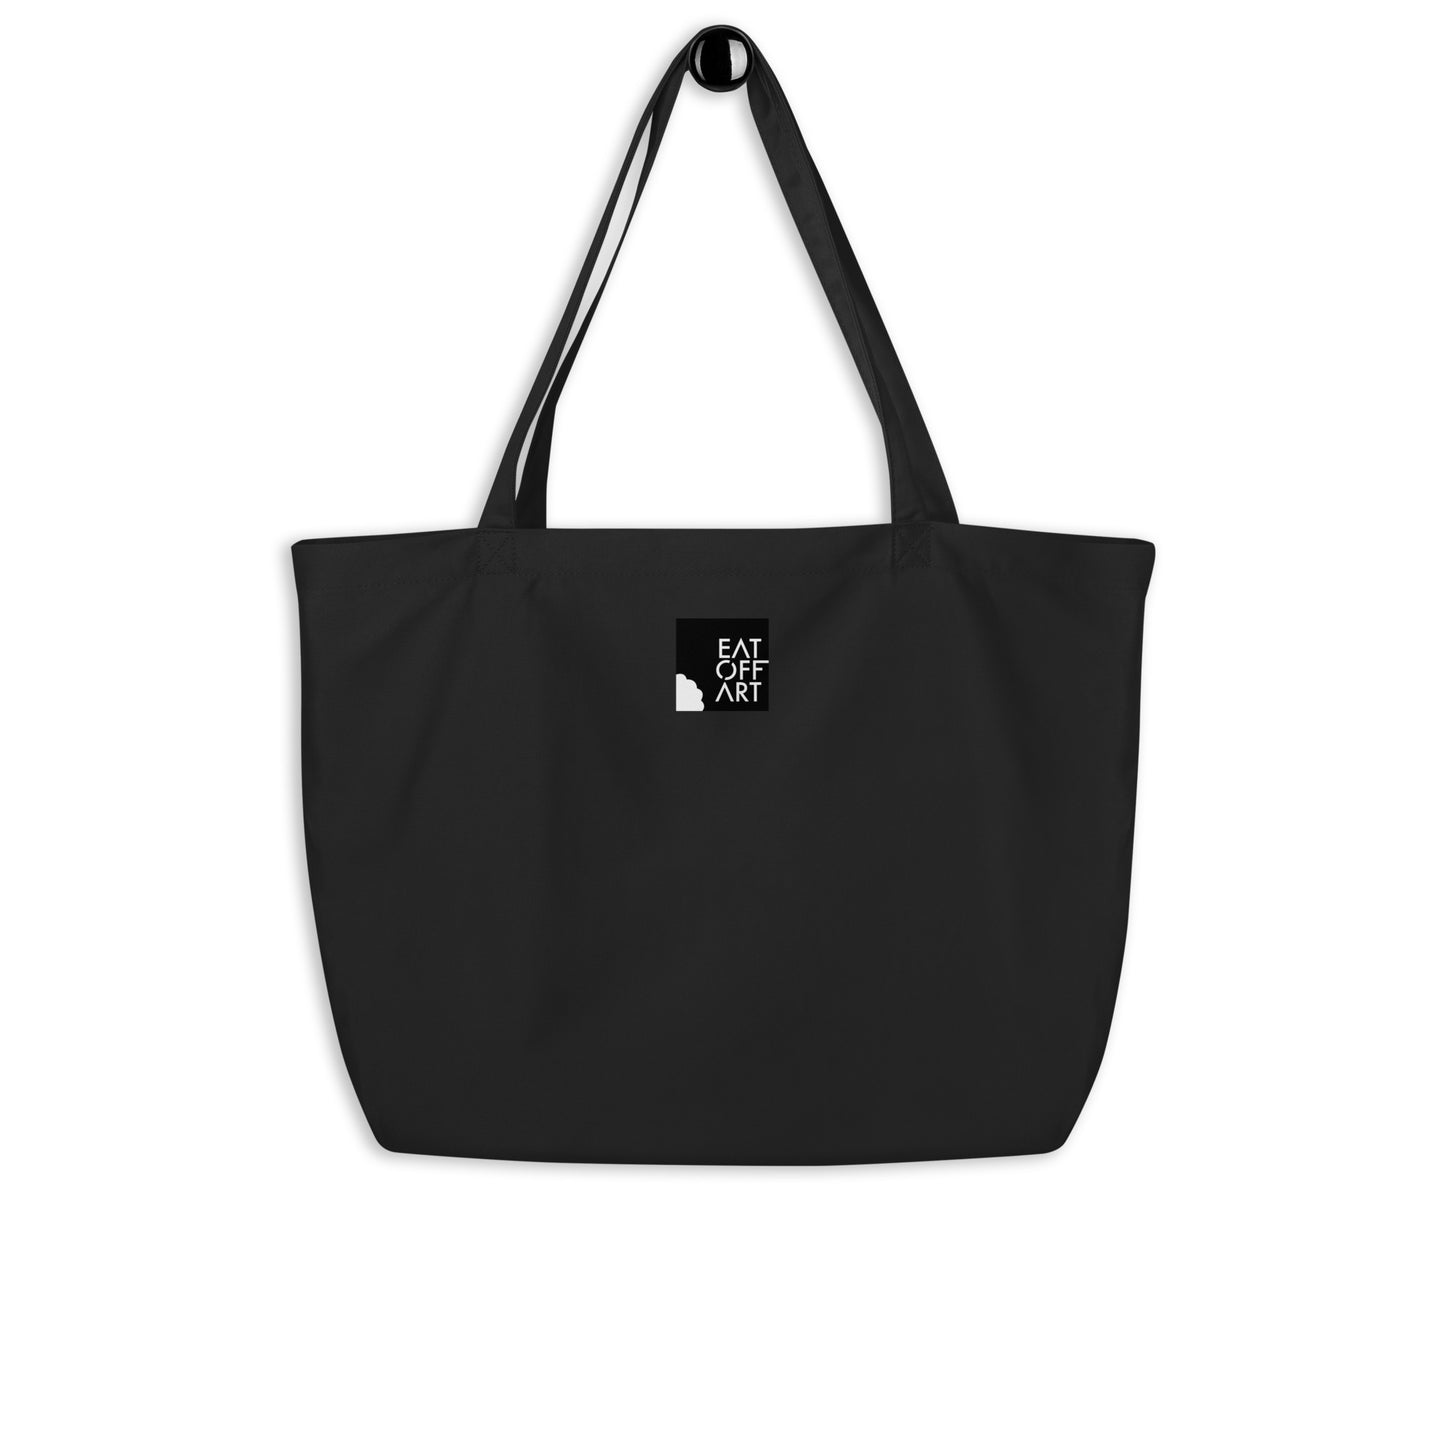 Artists Run the Show - Large organic tote bag